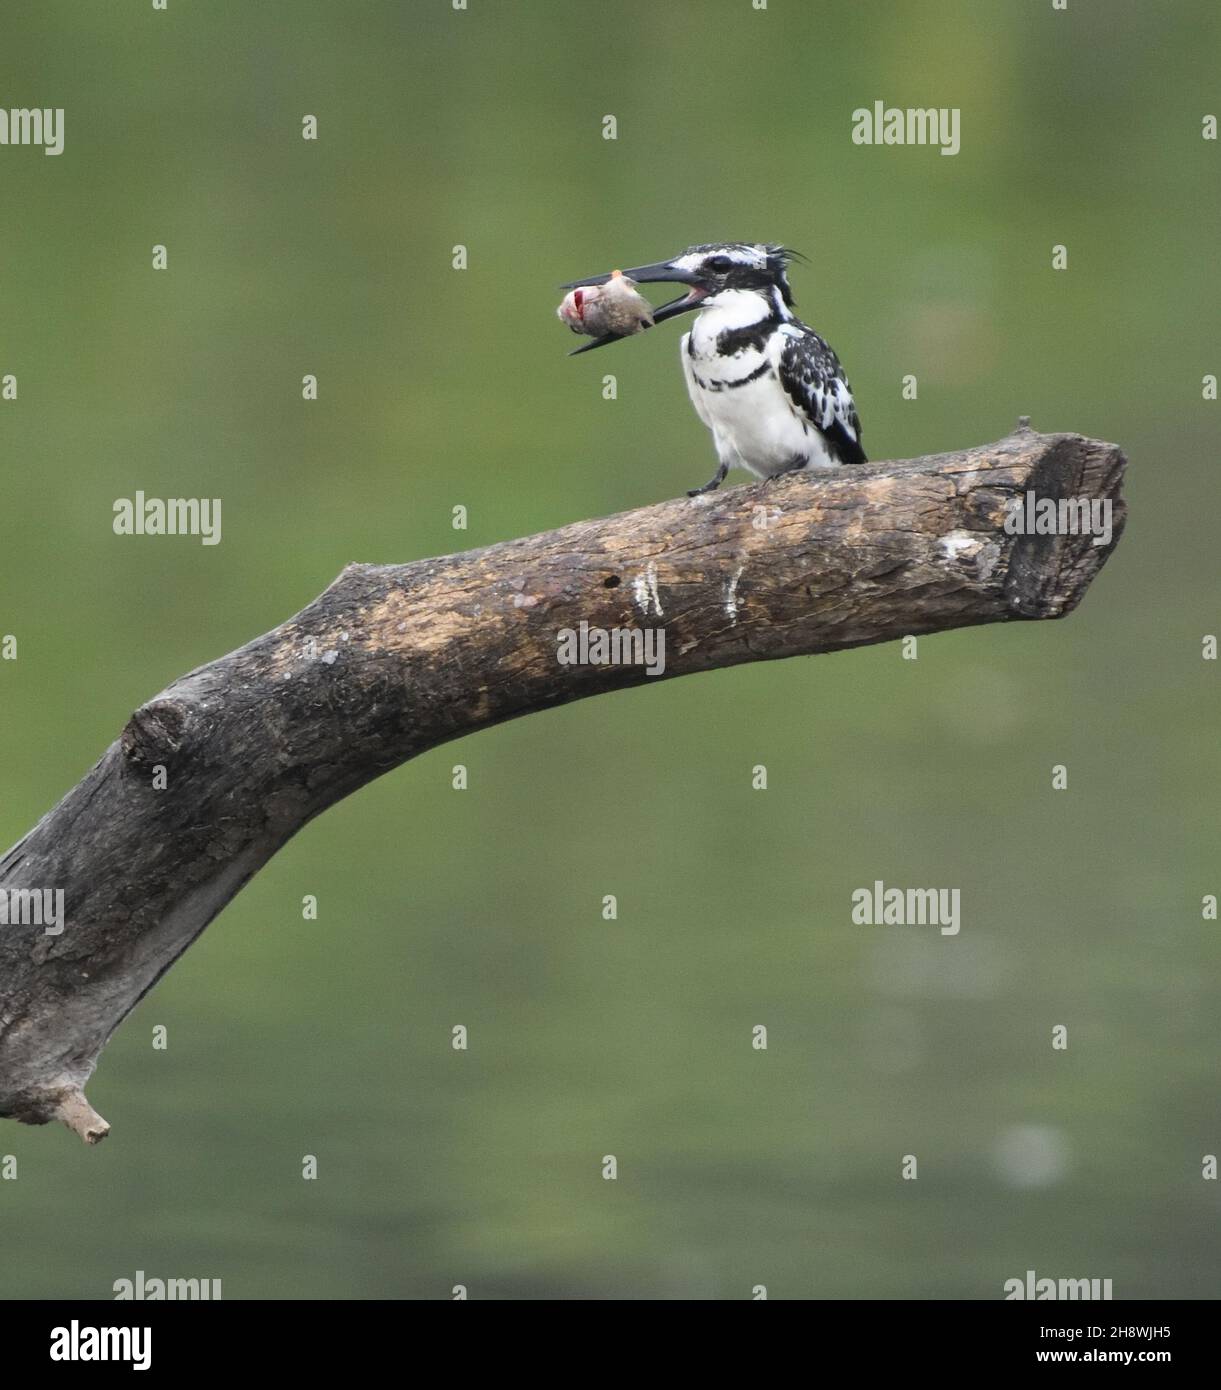 A pied kingfisher (Ceryle rudis) deals with a large fish on a branch above a mangrove lined creek.    Lamin, The Republic of the Gambia. Stock Photo